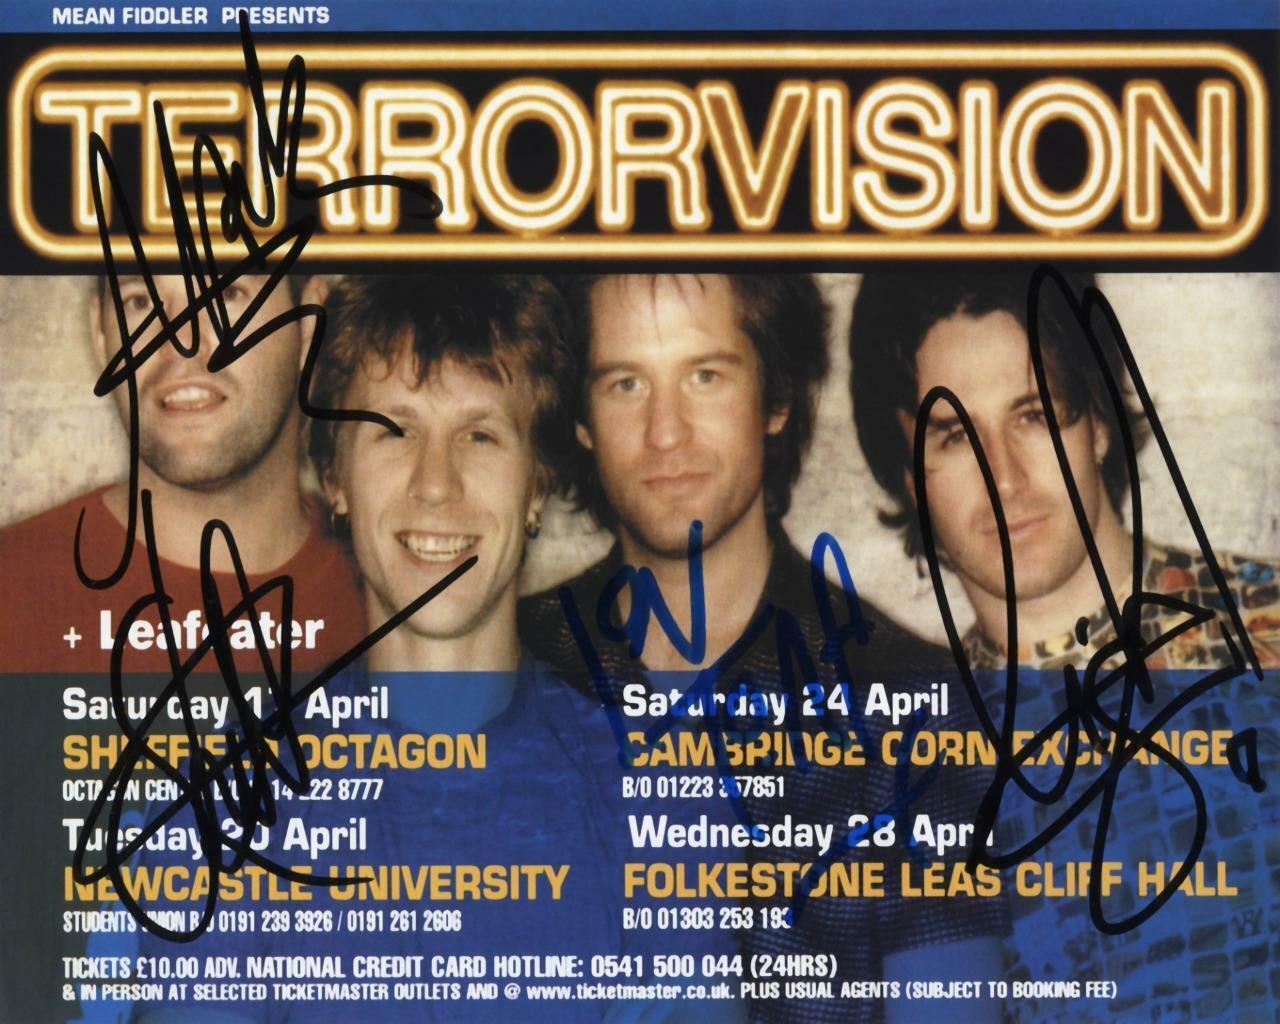 Terrorvision cast SIGNED AUTOGRAPHED 10 X 8